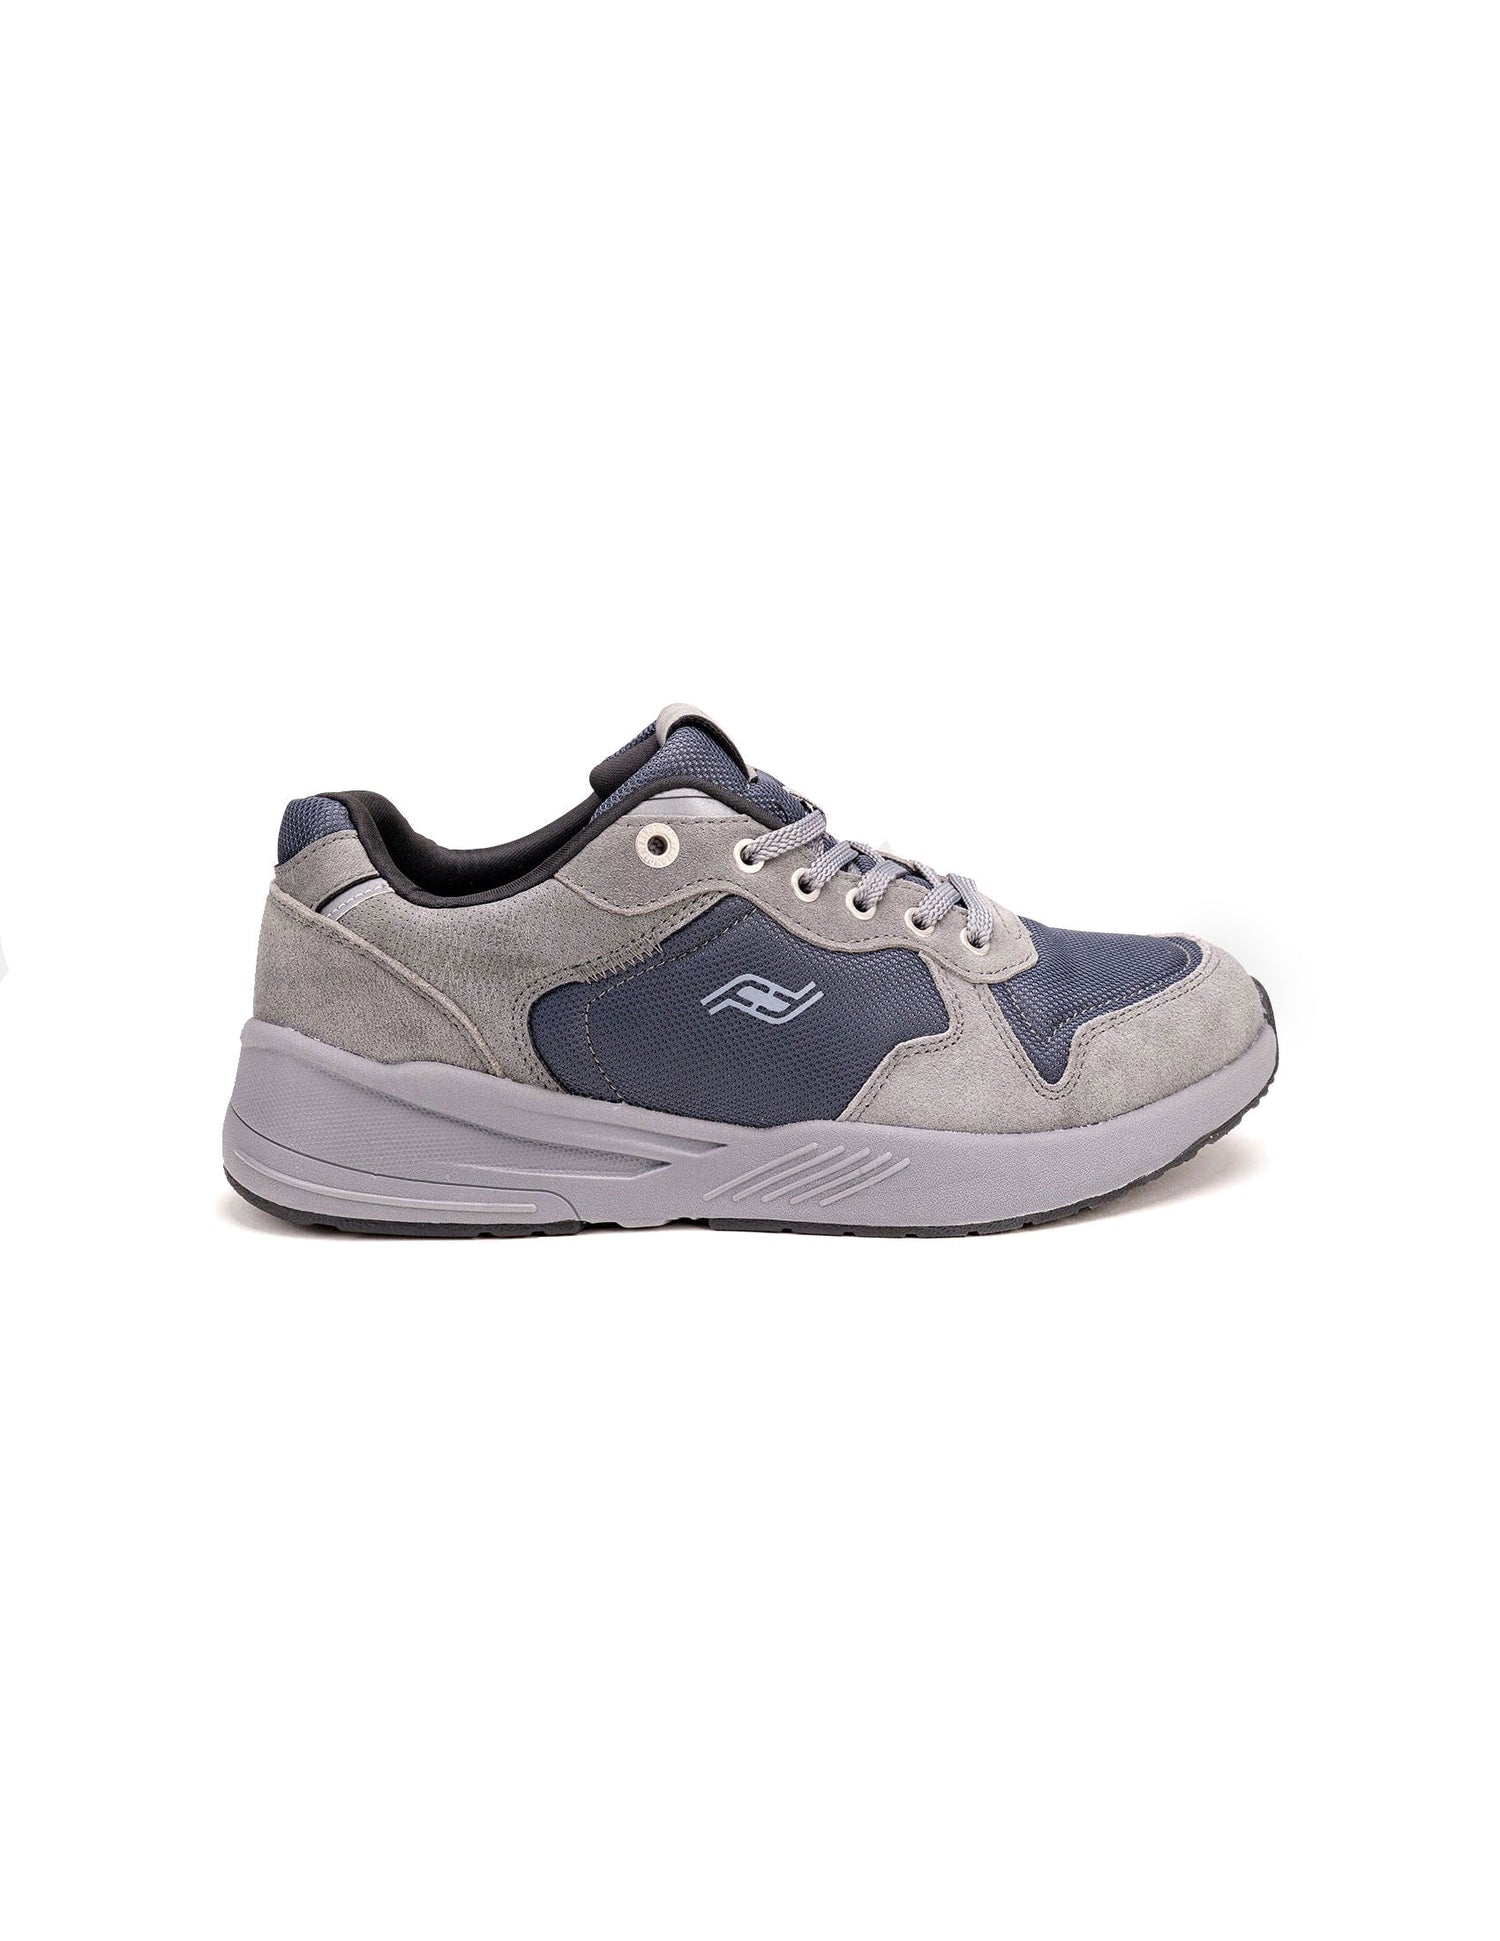 Men's Lightweight Cushioned Shoes with Rear Zipper Access